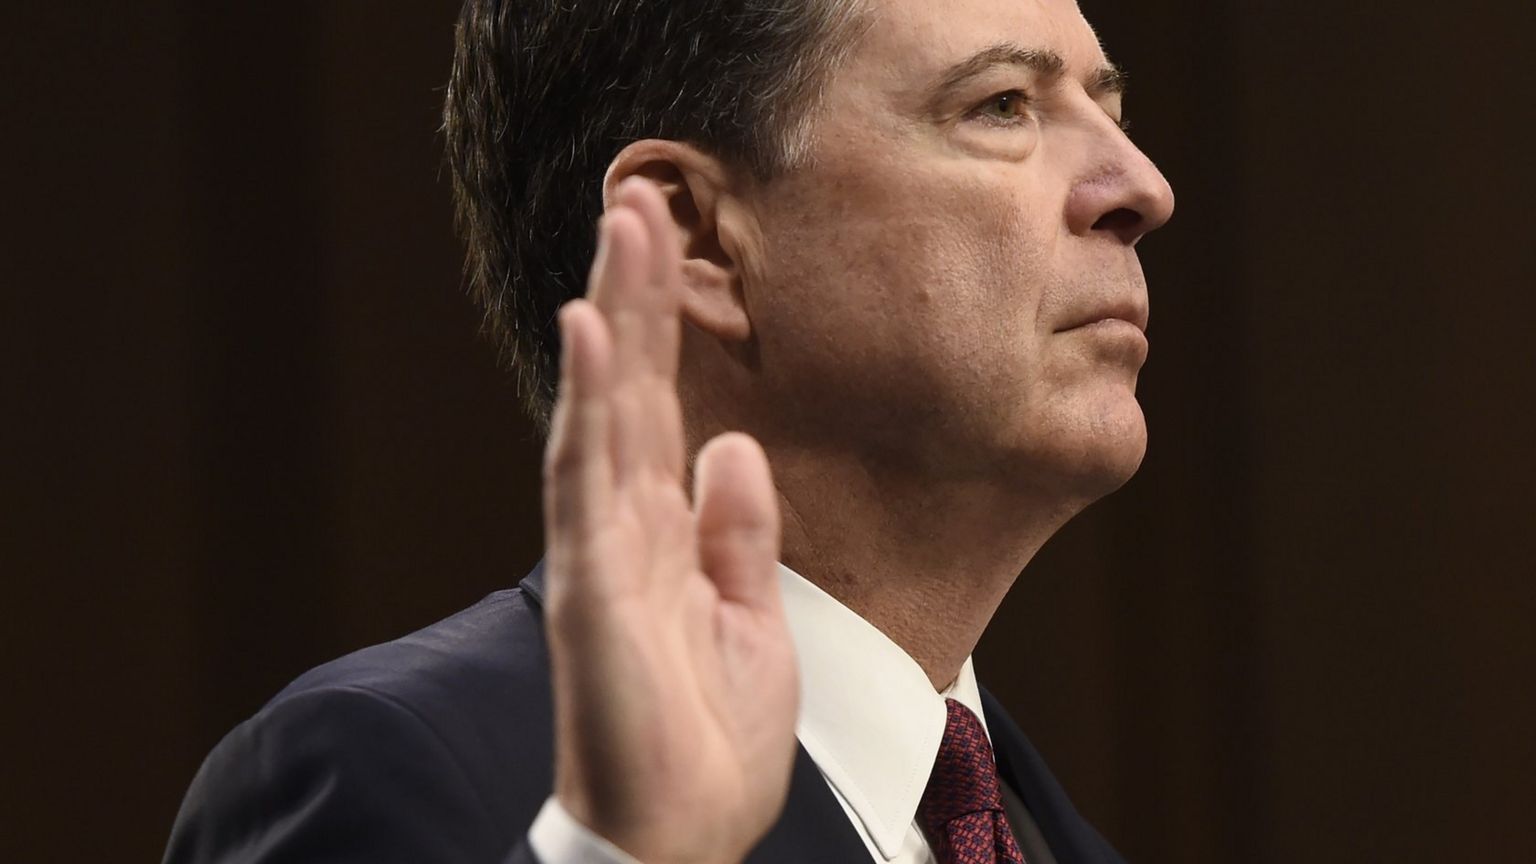 James Comey takes oath as he prepares to give evidence